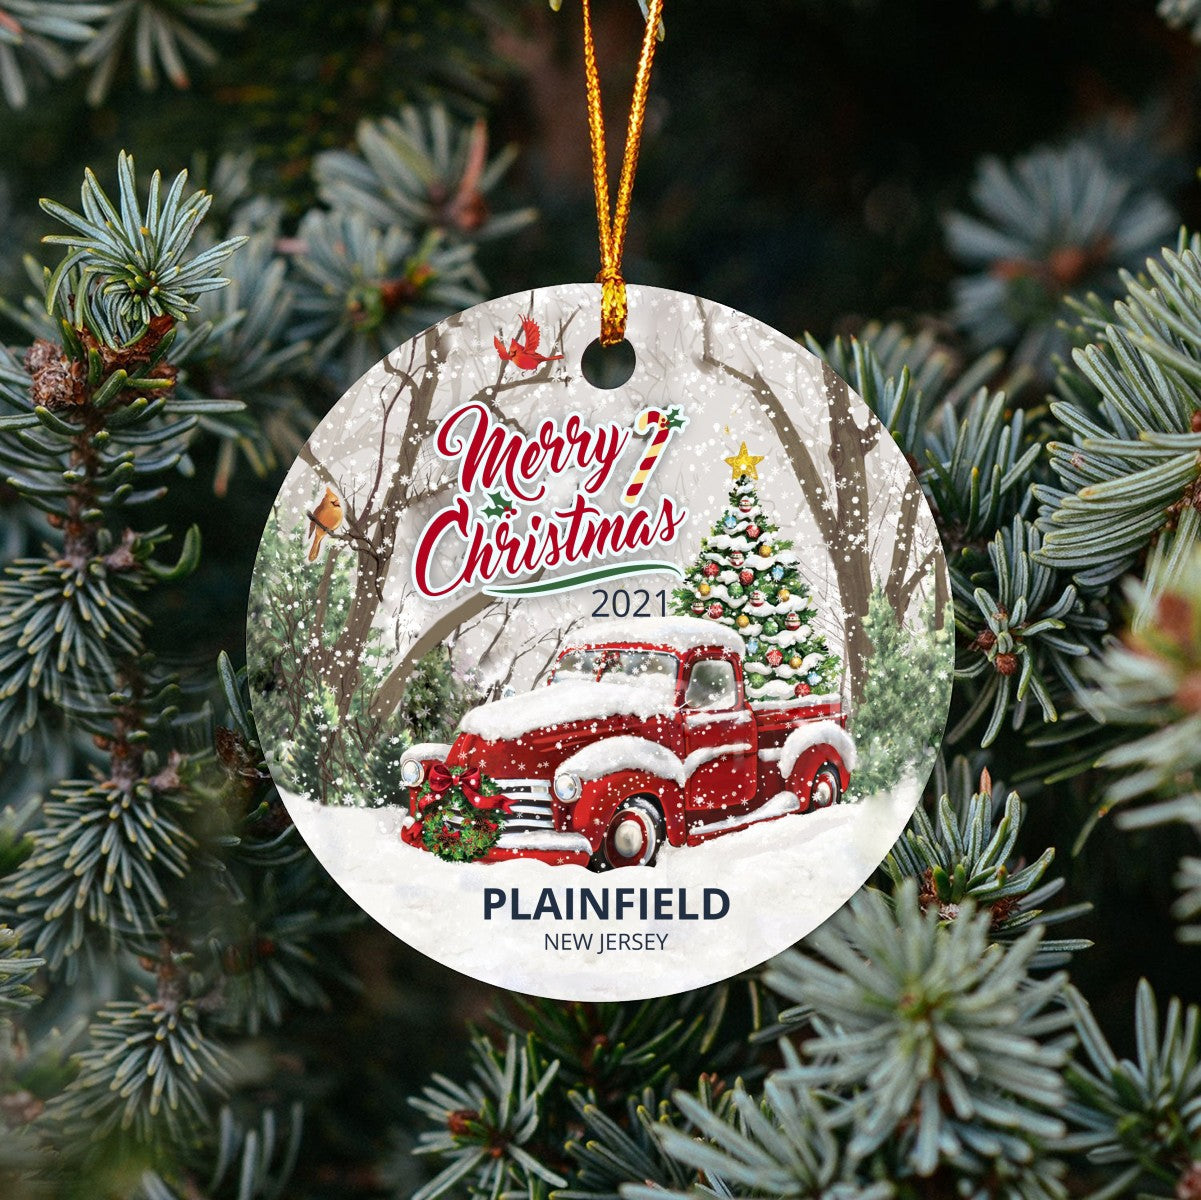 Christmas Tree Ornaments Plainfield - Ornament Customize With Name City And State Plainfield New Jersey NJ - Red Truck Xmas Ornaments 3'' Plastic Gift For Family, Friend And Housewarming